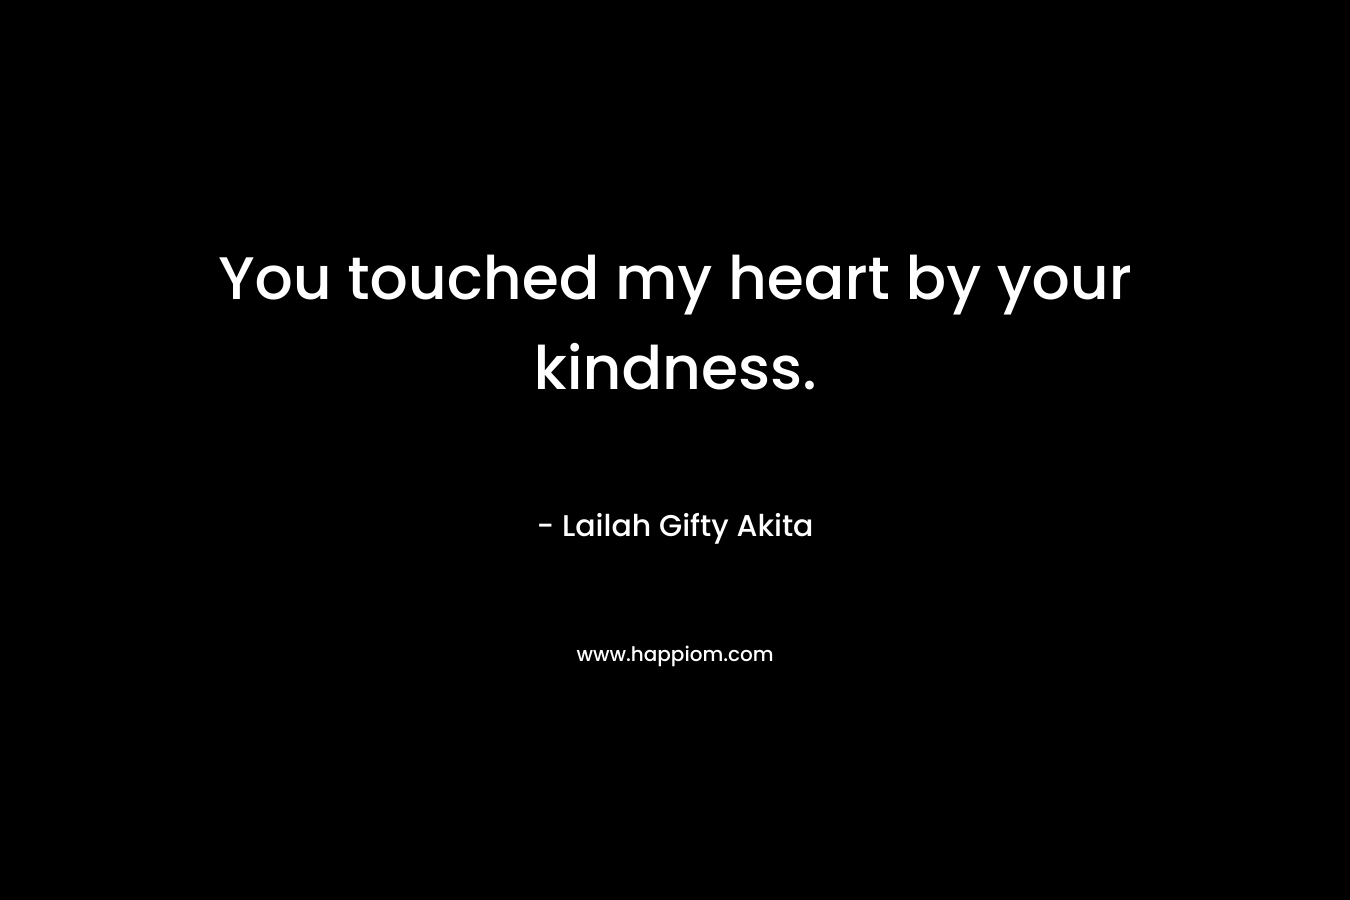 You touched my heart by your kindness.